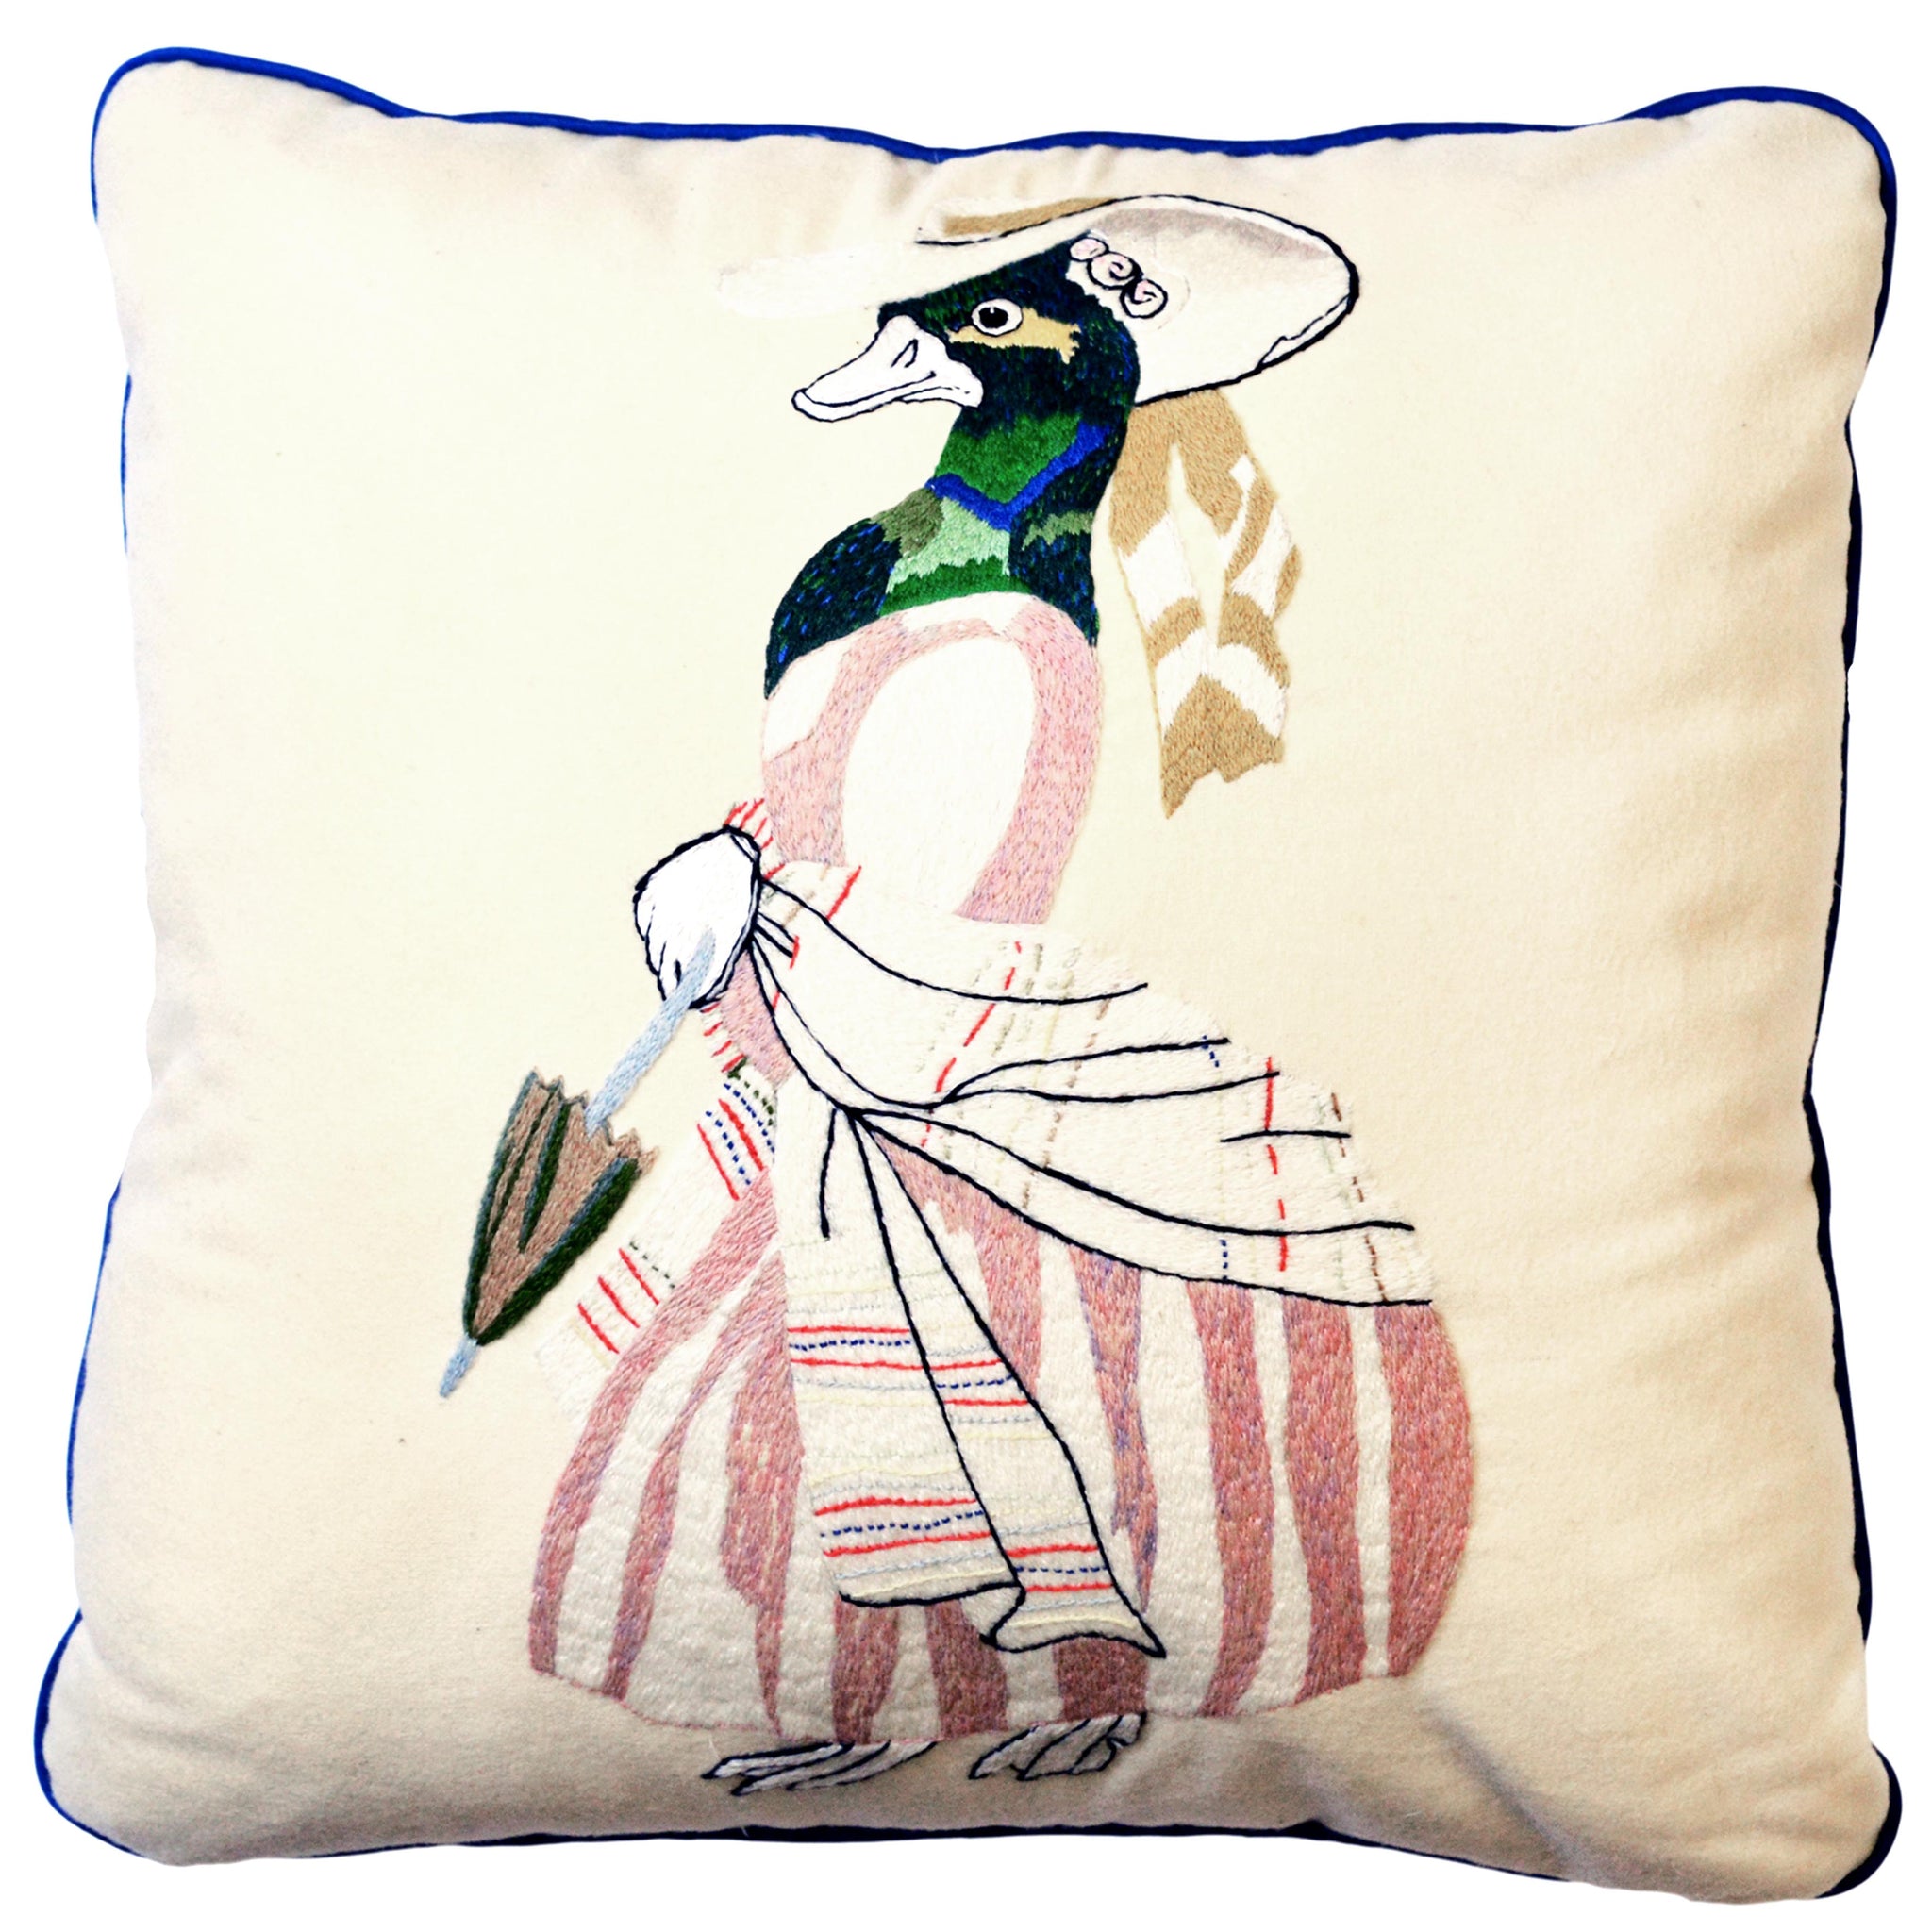 Animaux Hand-Embroidered Duck Wool Cream Green Pink Cushion Fine Cell Work Handmade in Prison